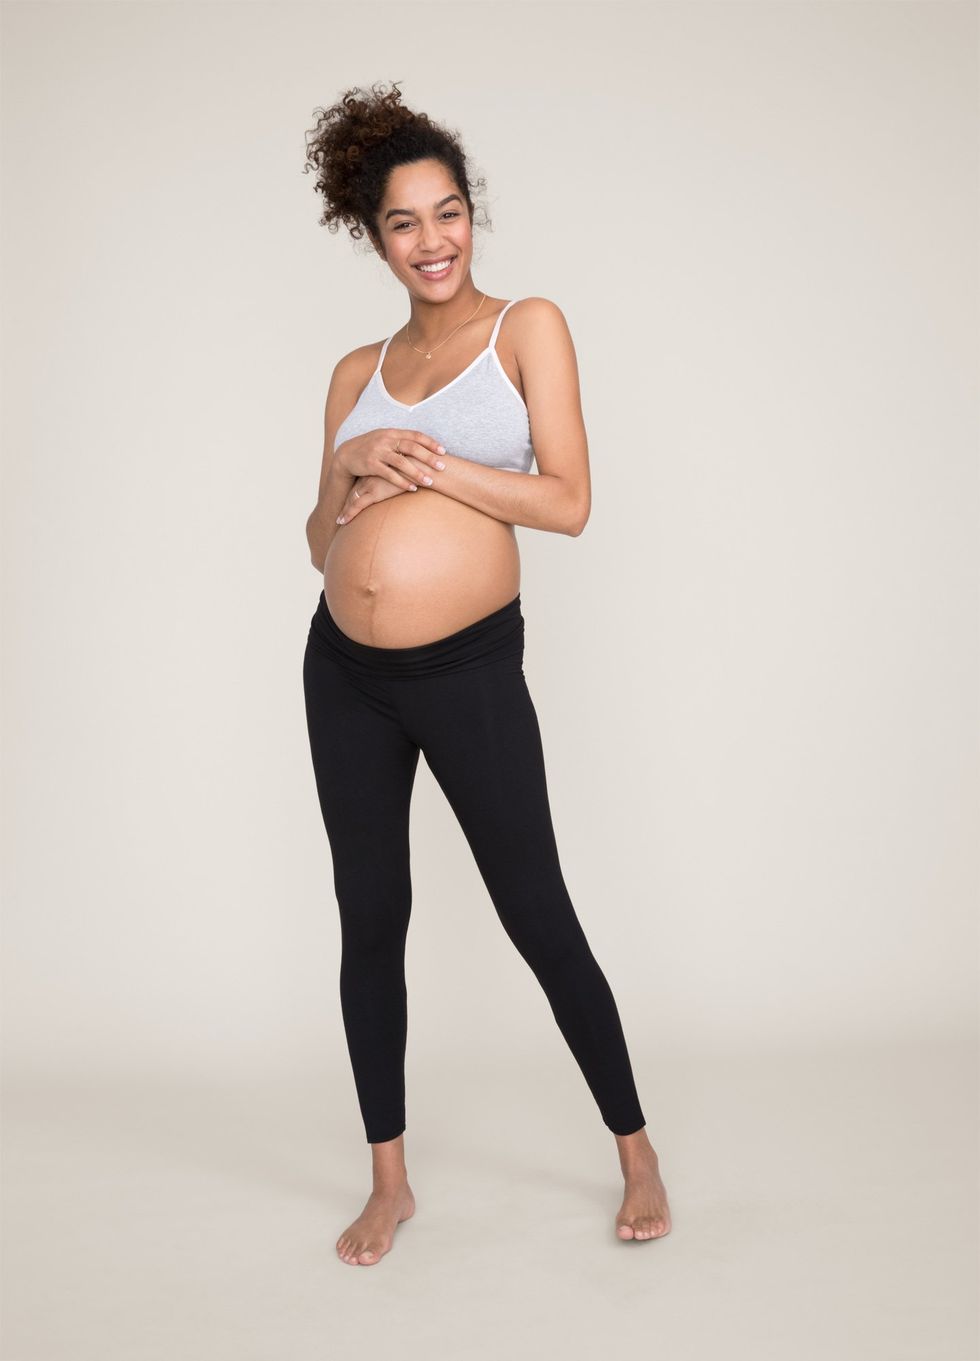 What To Wear For Pregnancy Yoga  FittaMamma's maternity yoga wear